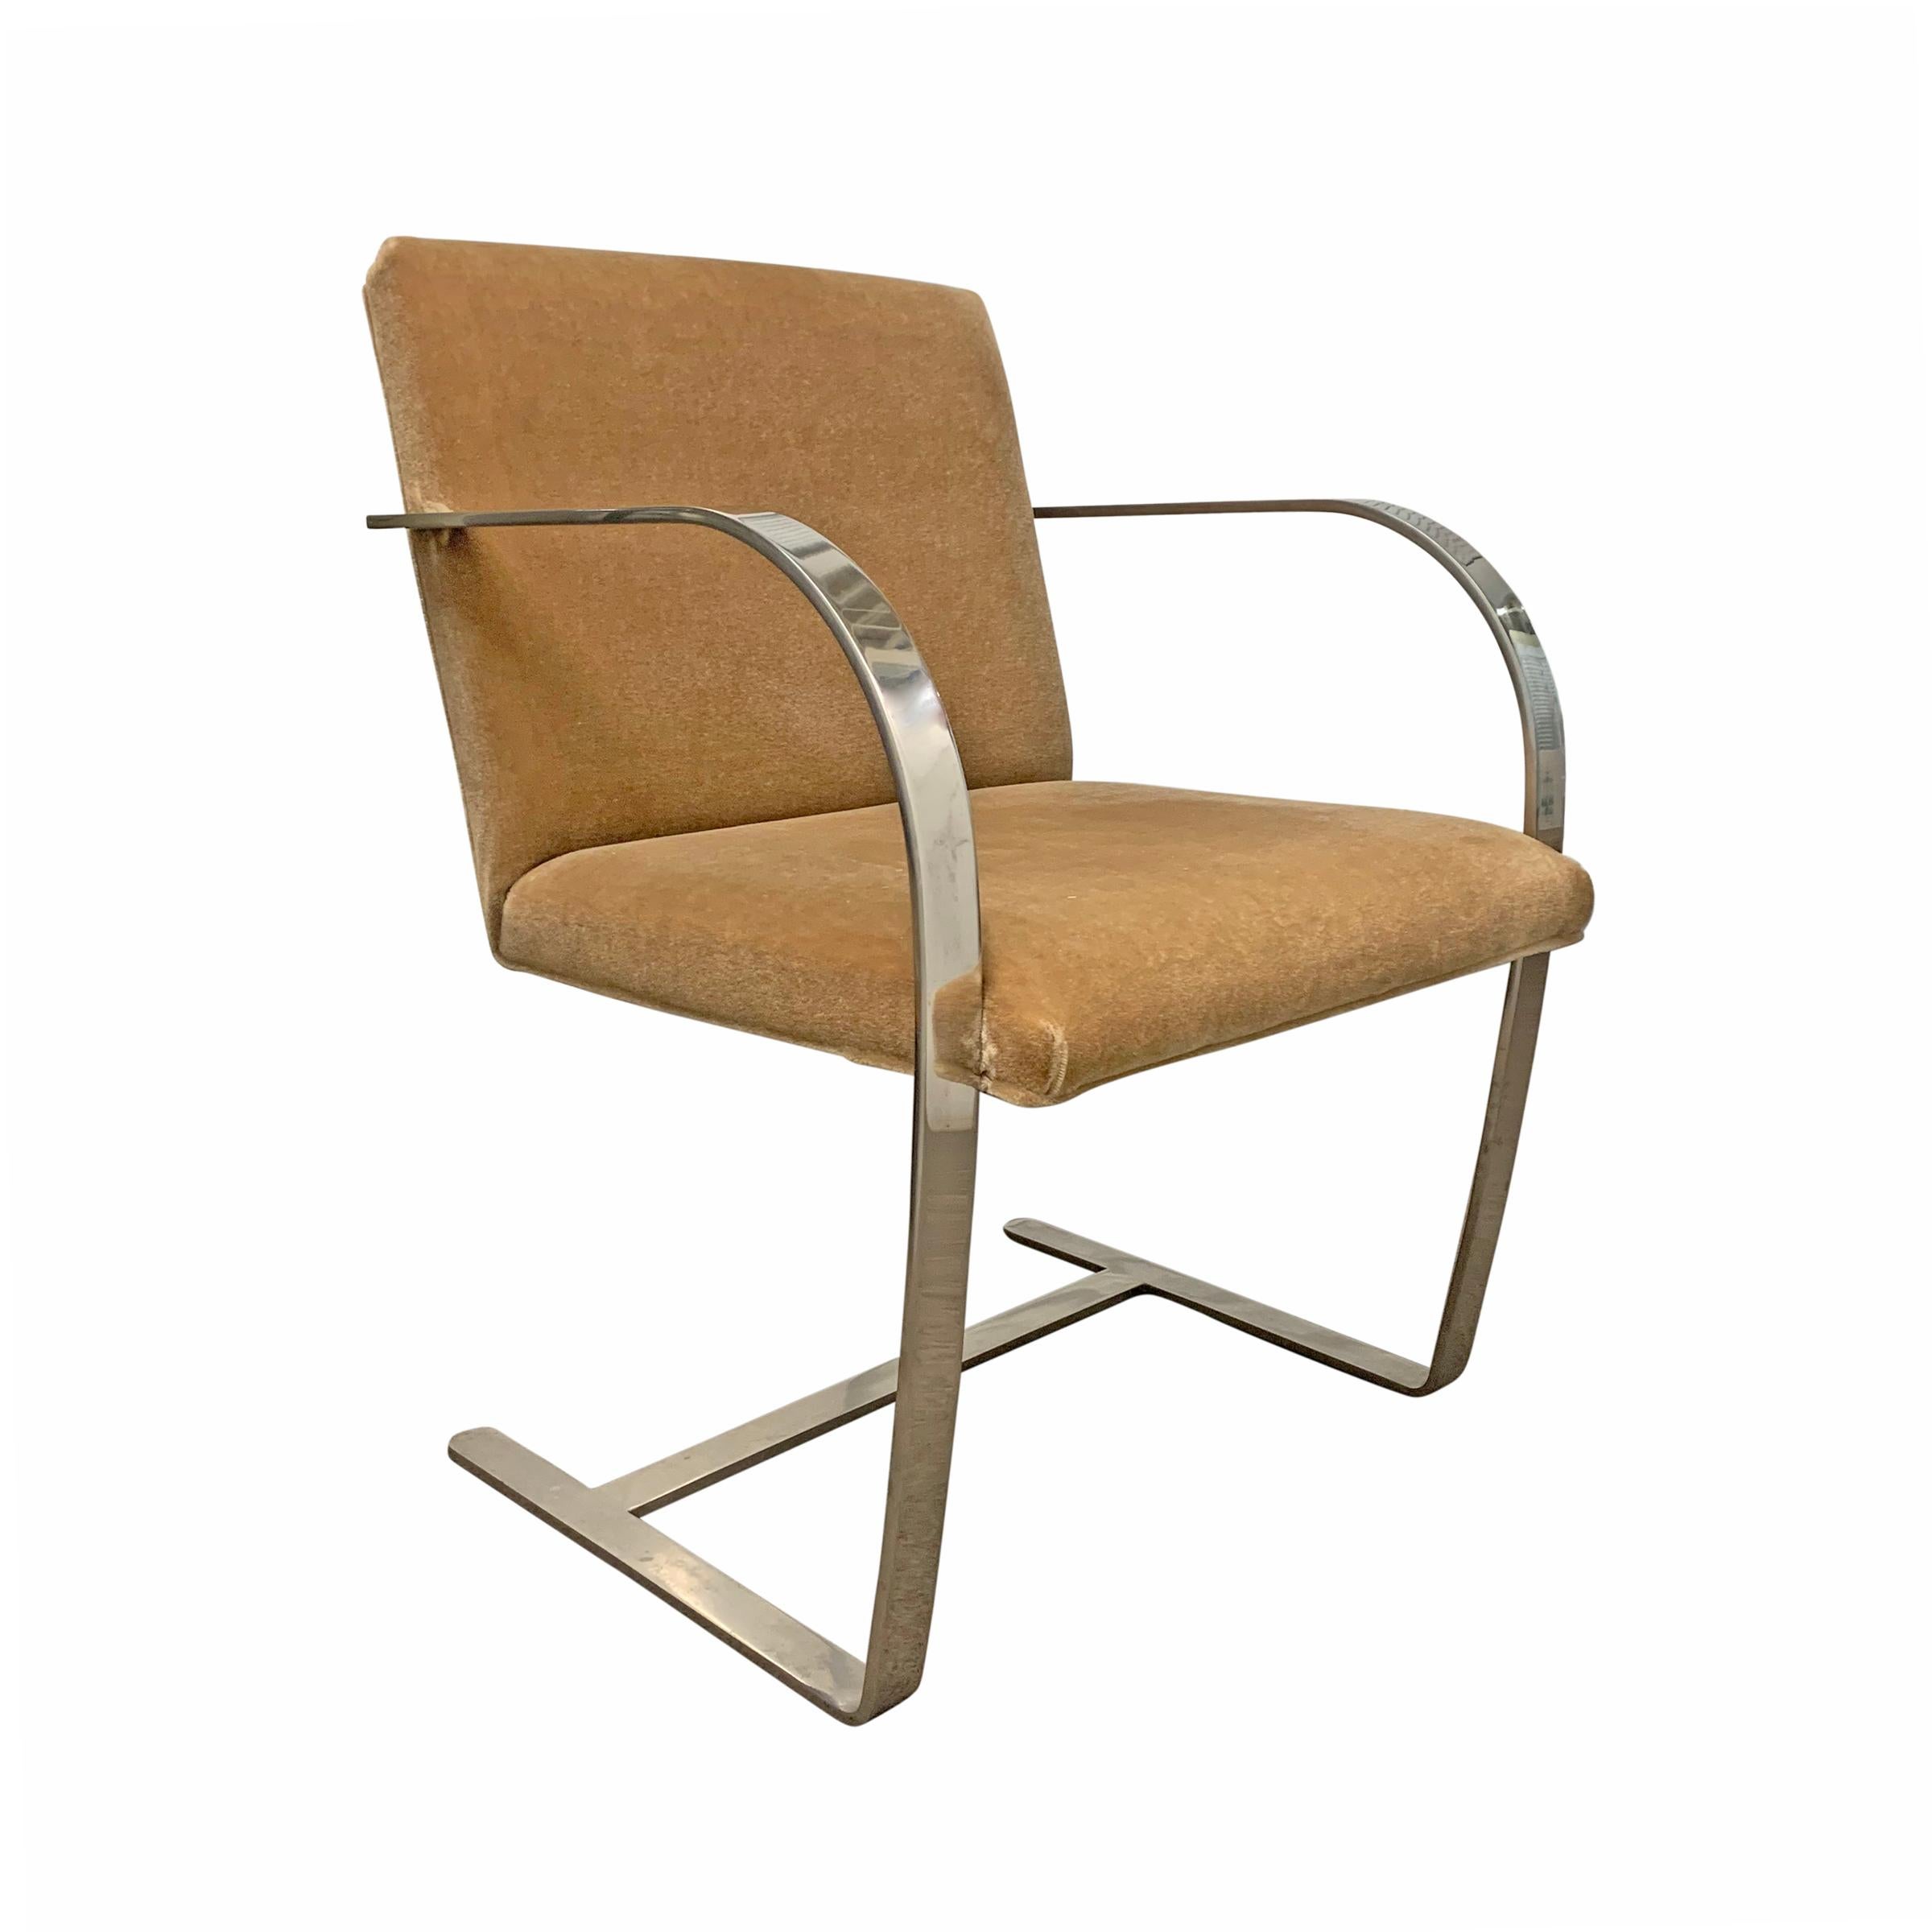 American Pair of Brno Chairs by Mies van der Rohe